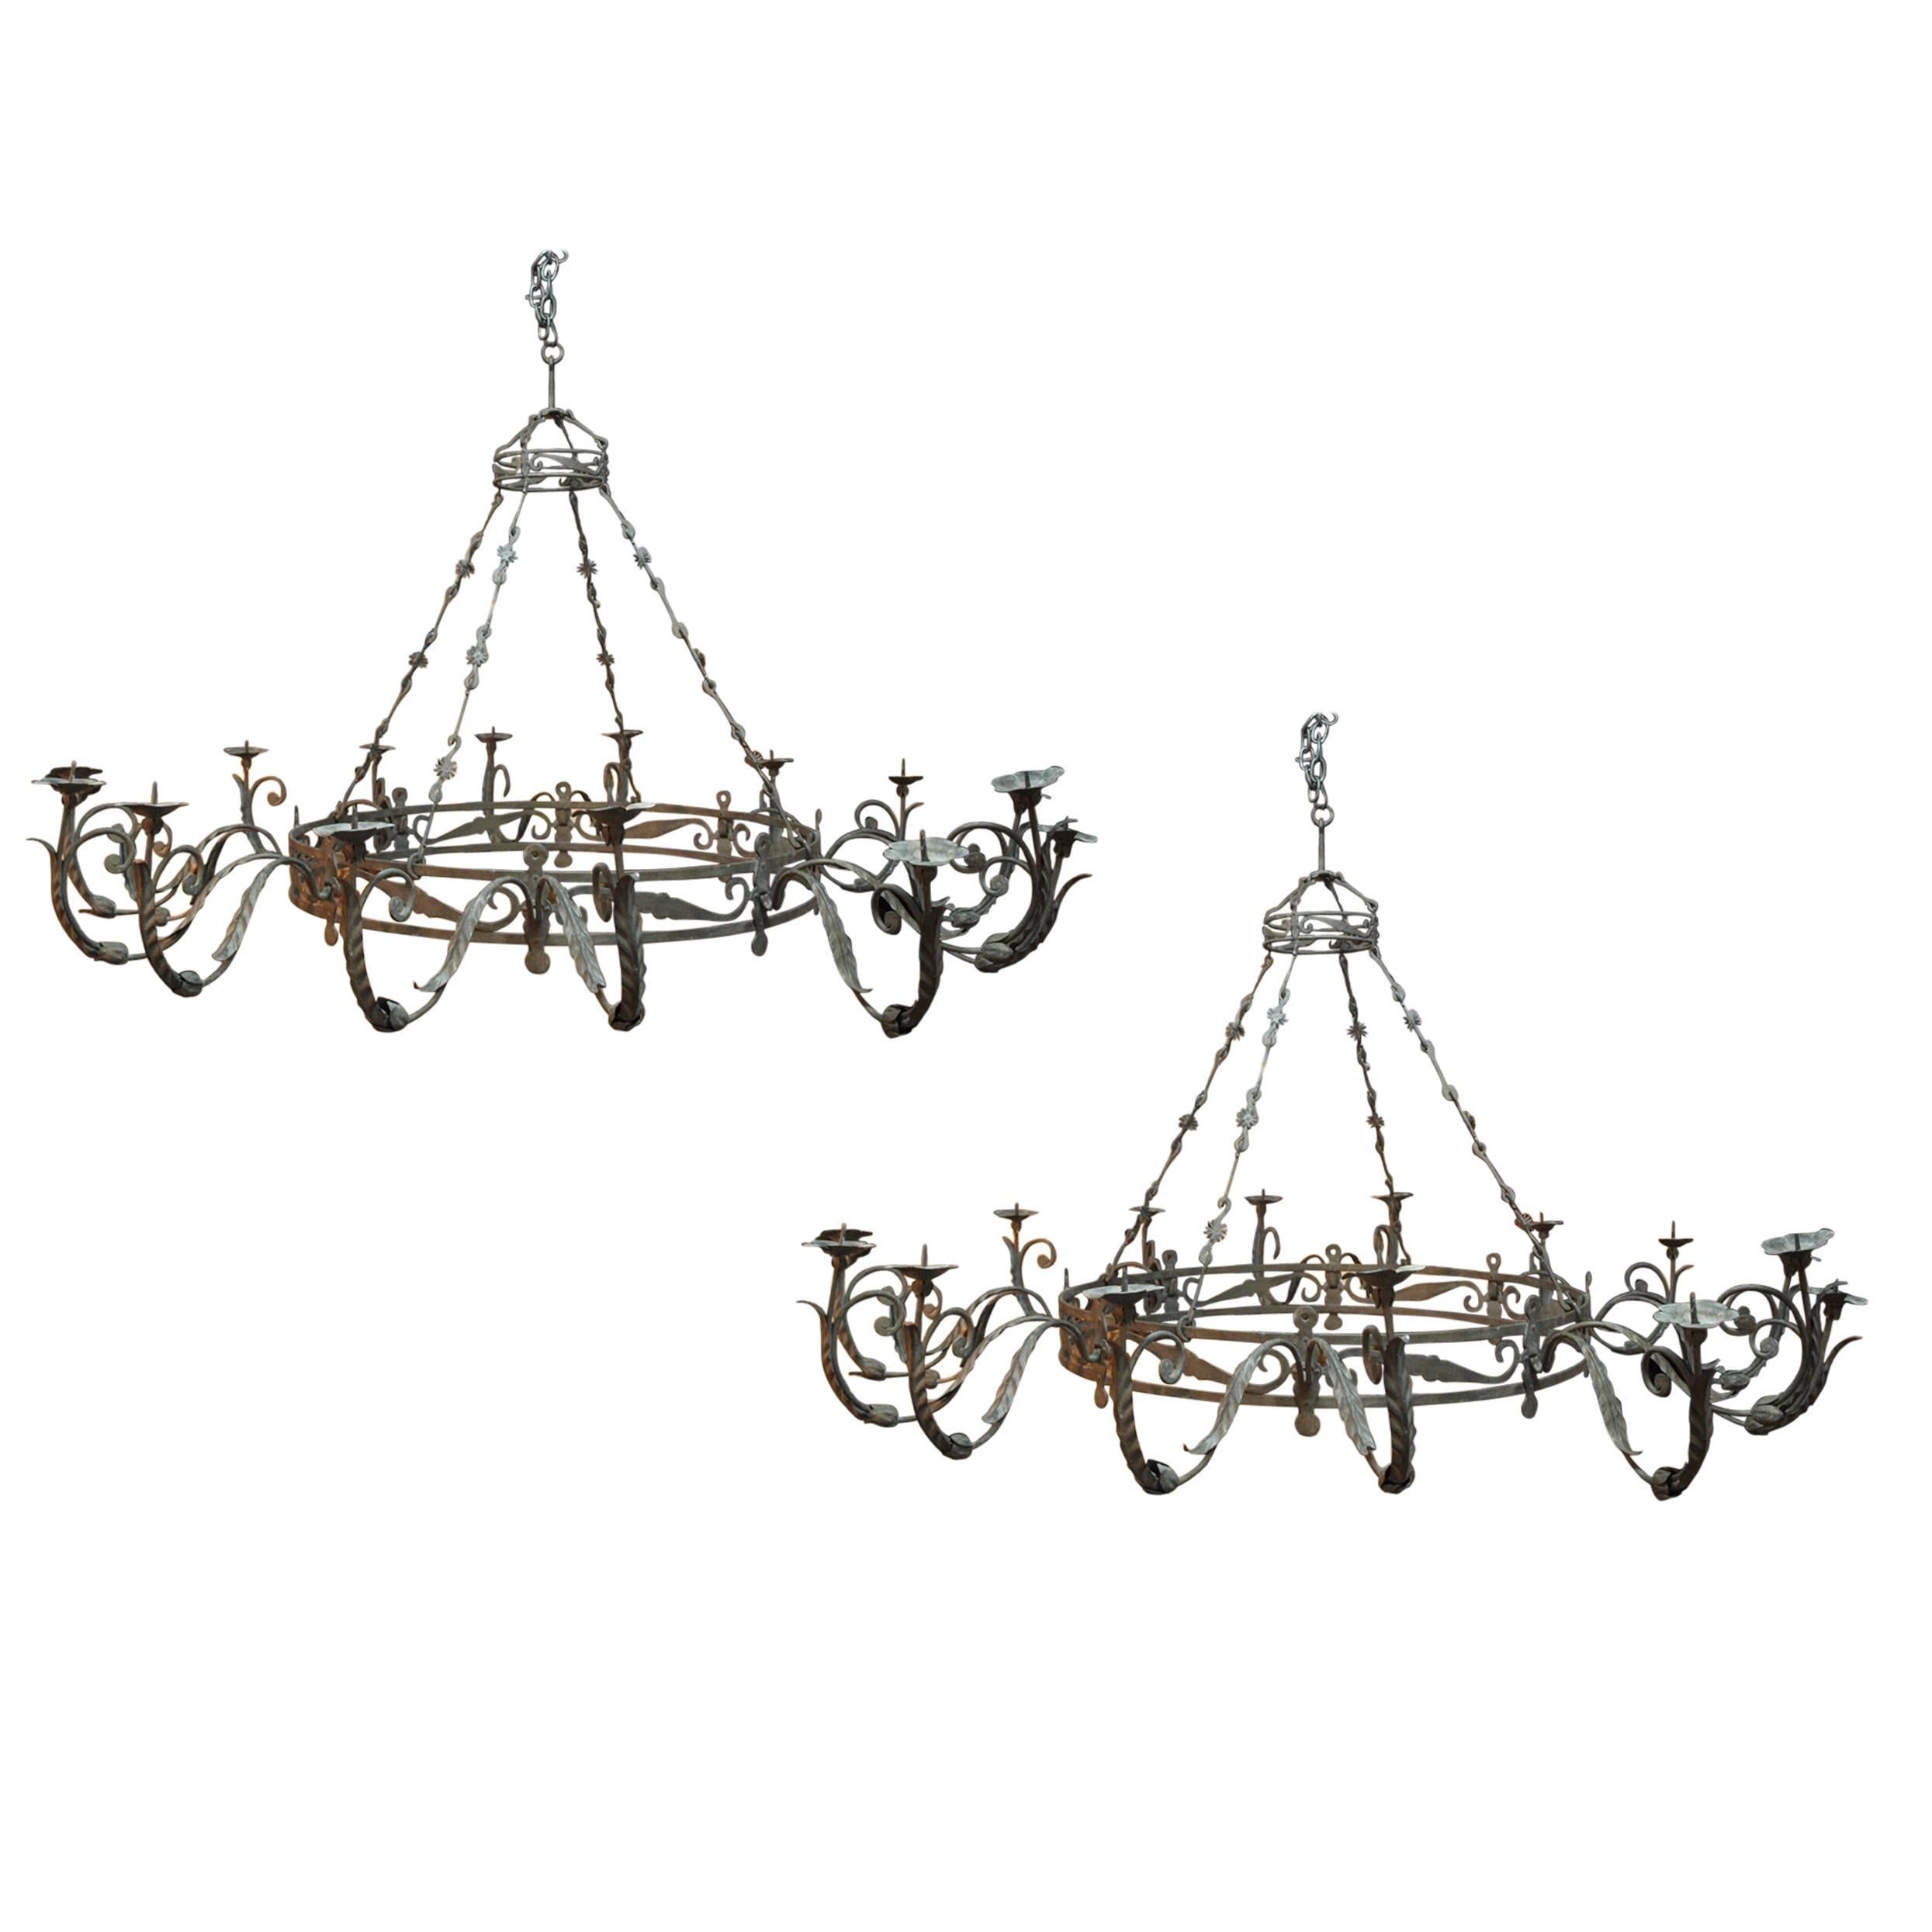 Pair of Outstanding and Monumental, Italian, Early 19th Century Iron Chandeliers